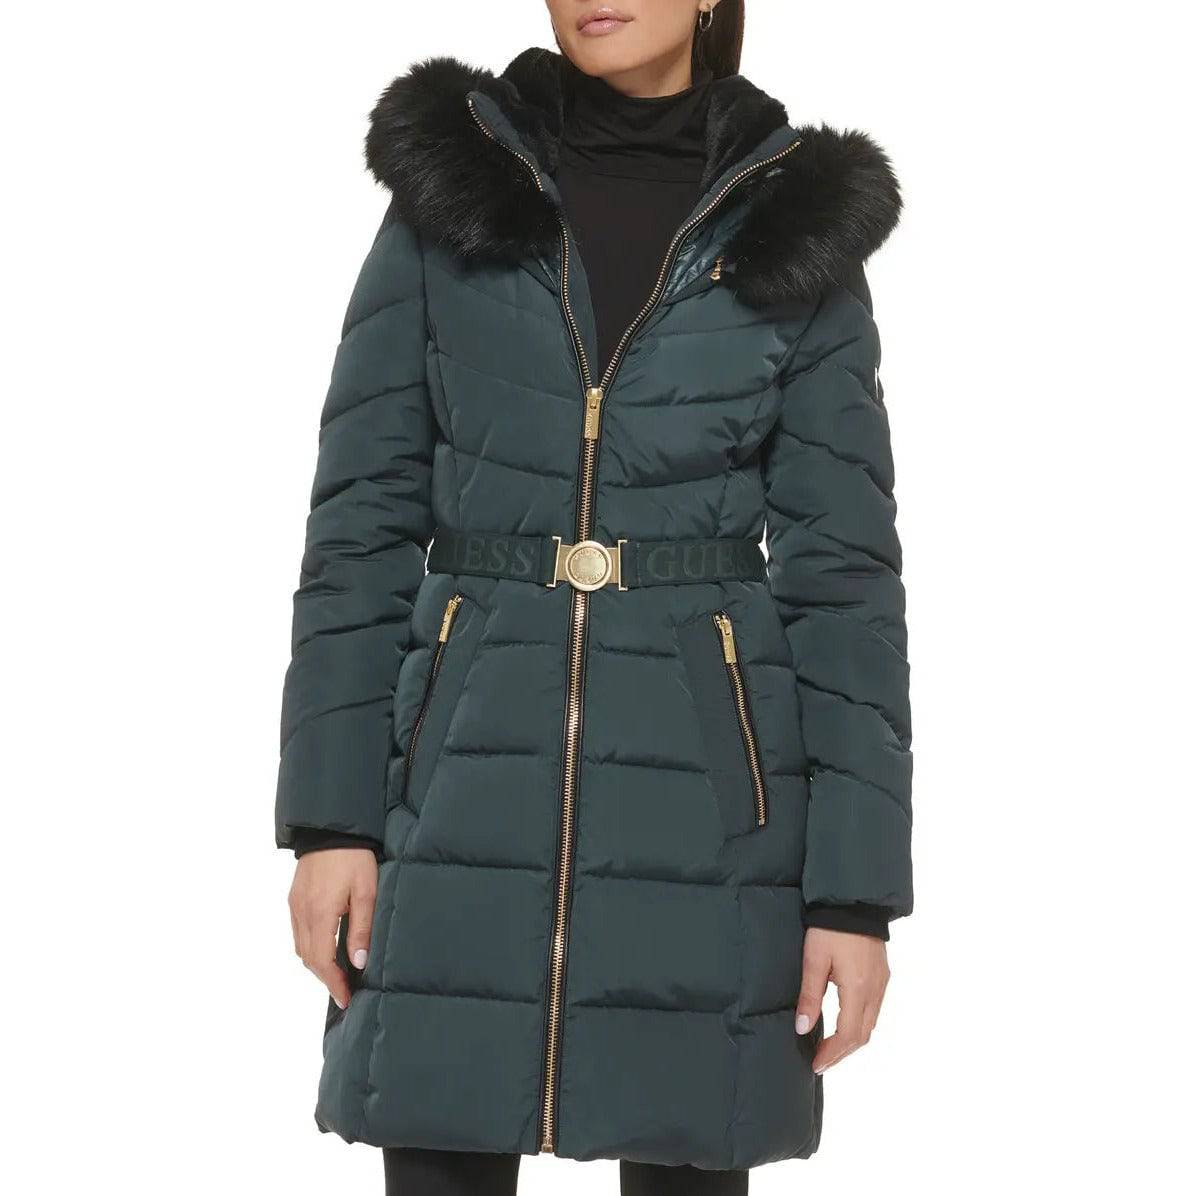 GUESS Women's Puffer Coat with Belt - Zooloo Leather